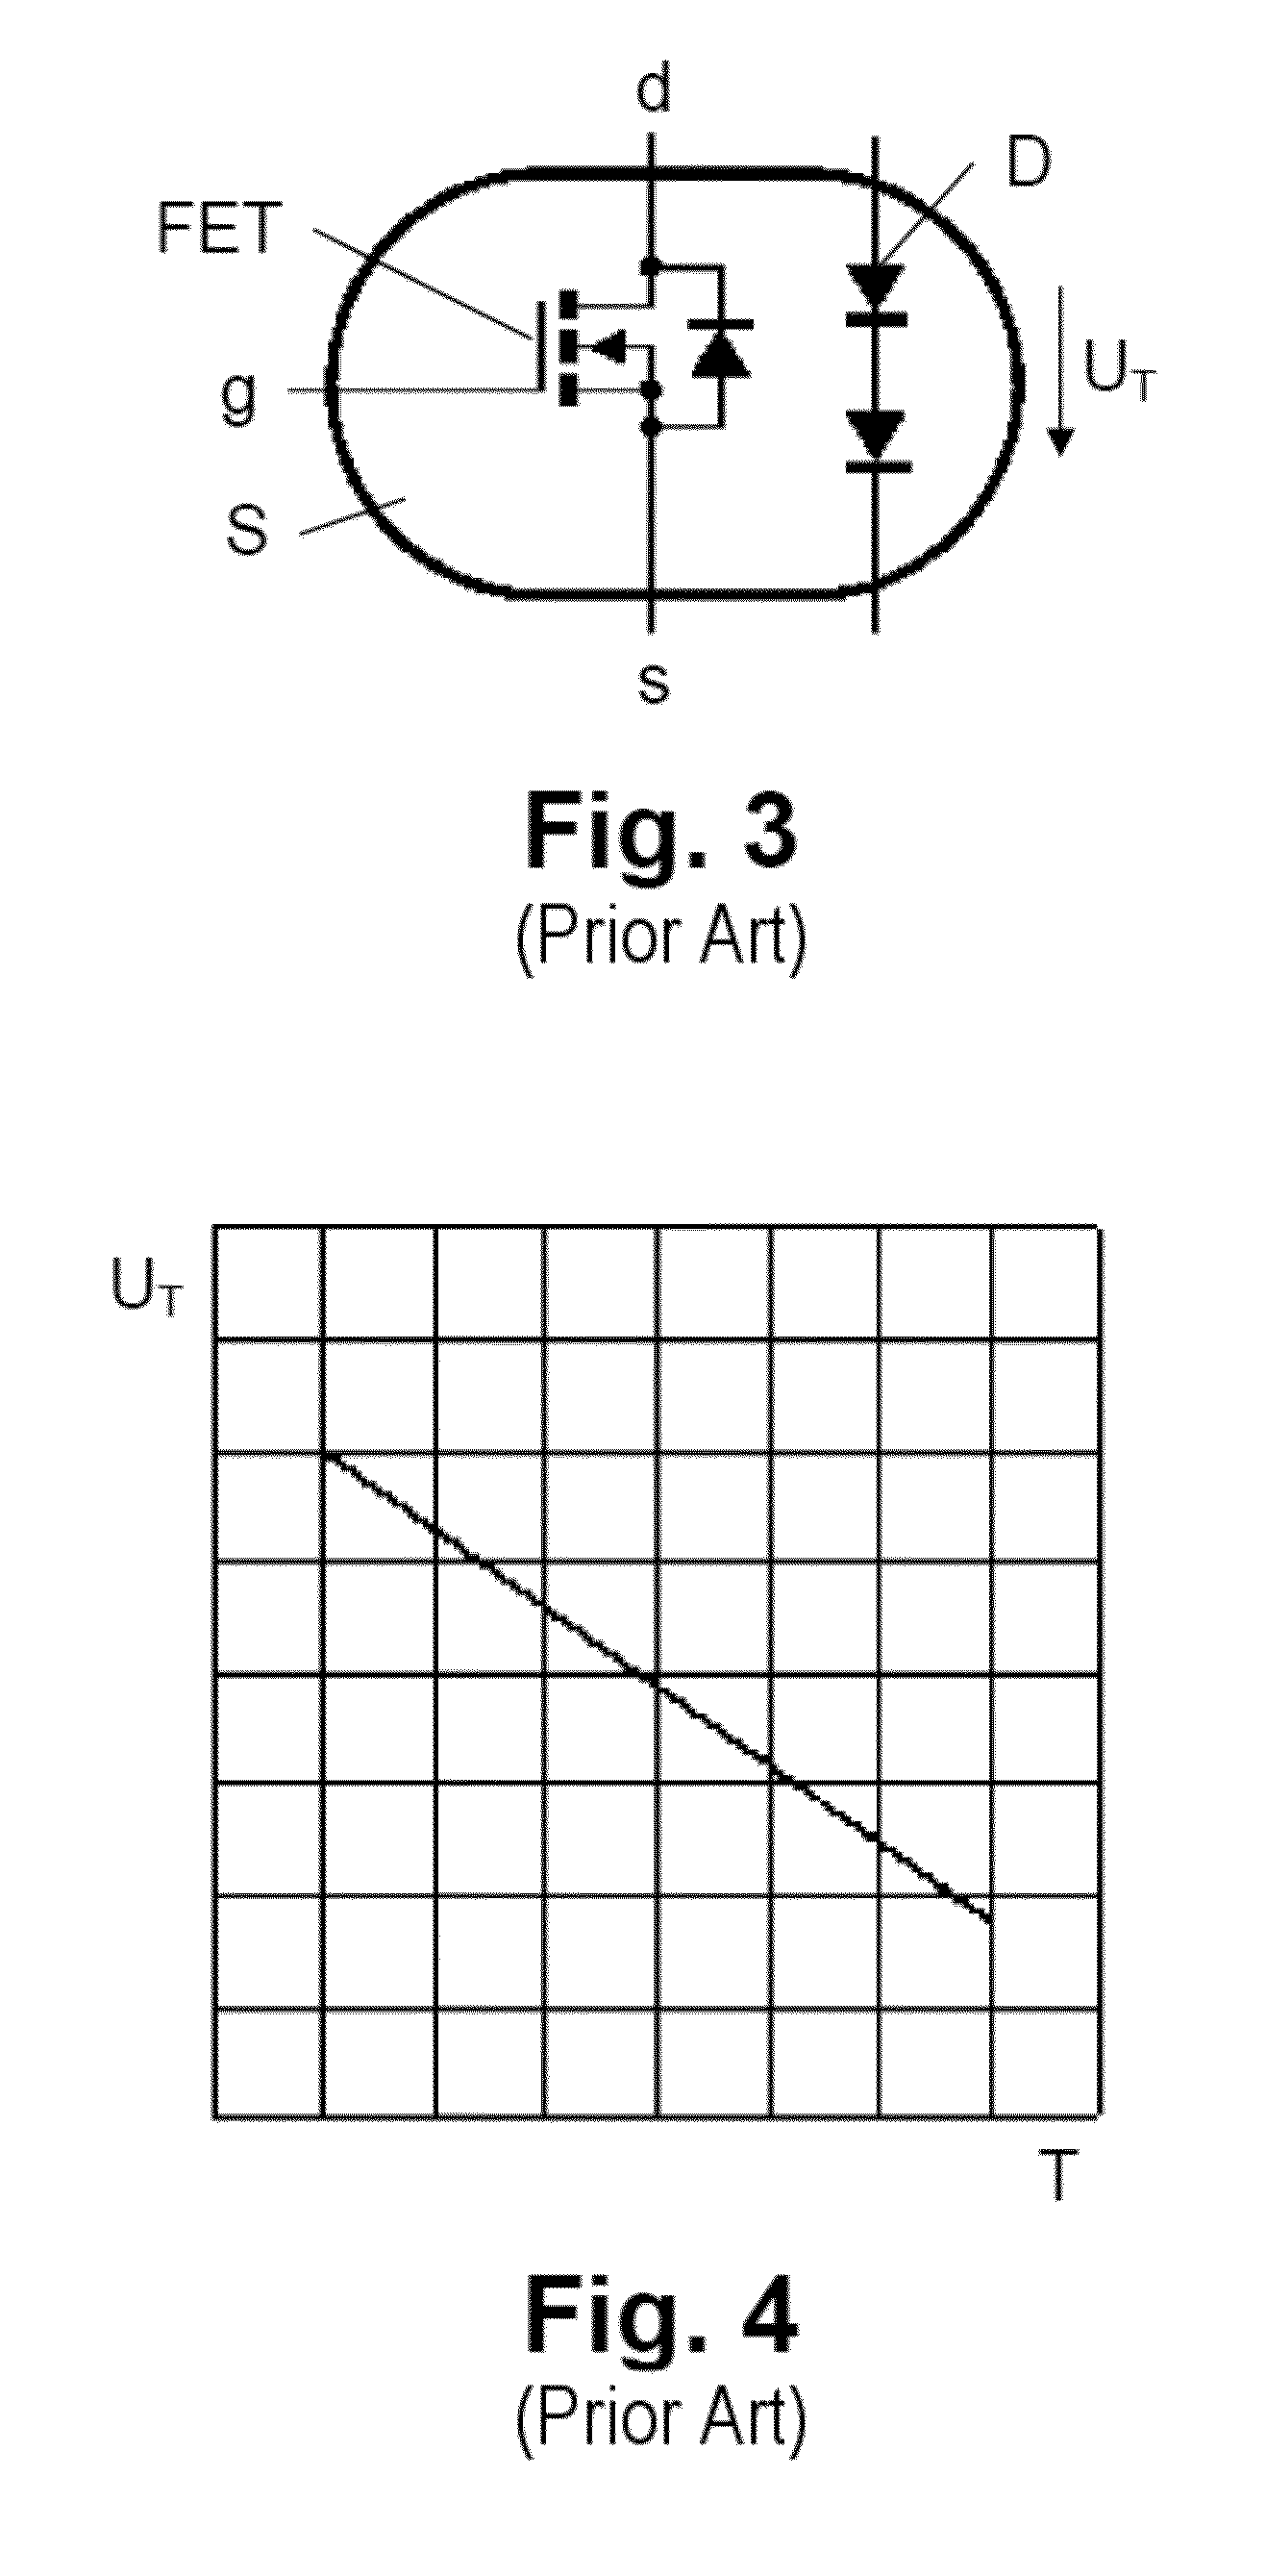 Method for measuring an electrical current and apparatus for this purpose